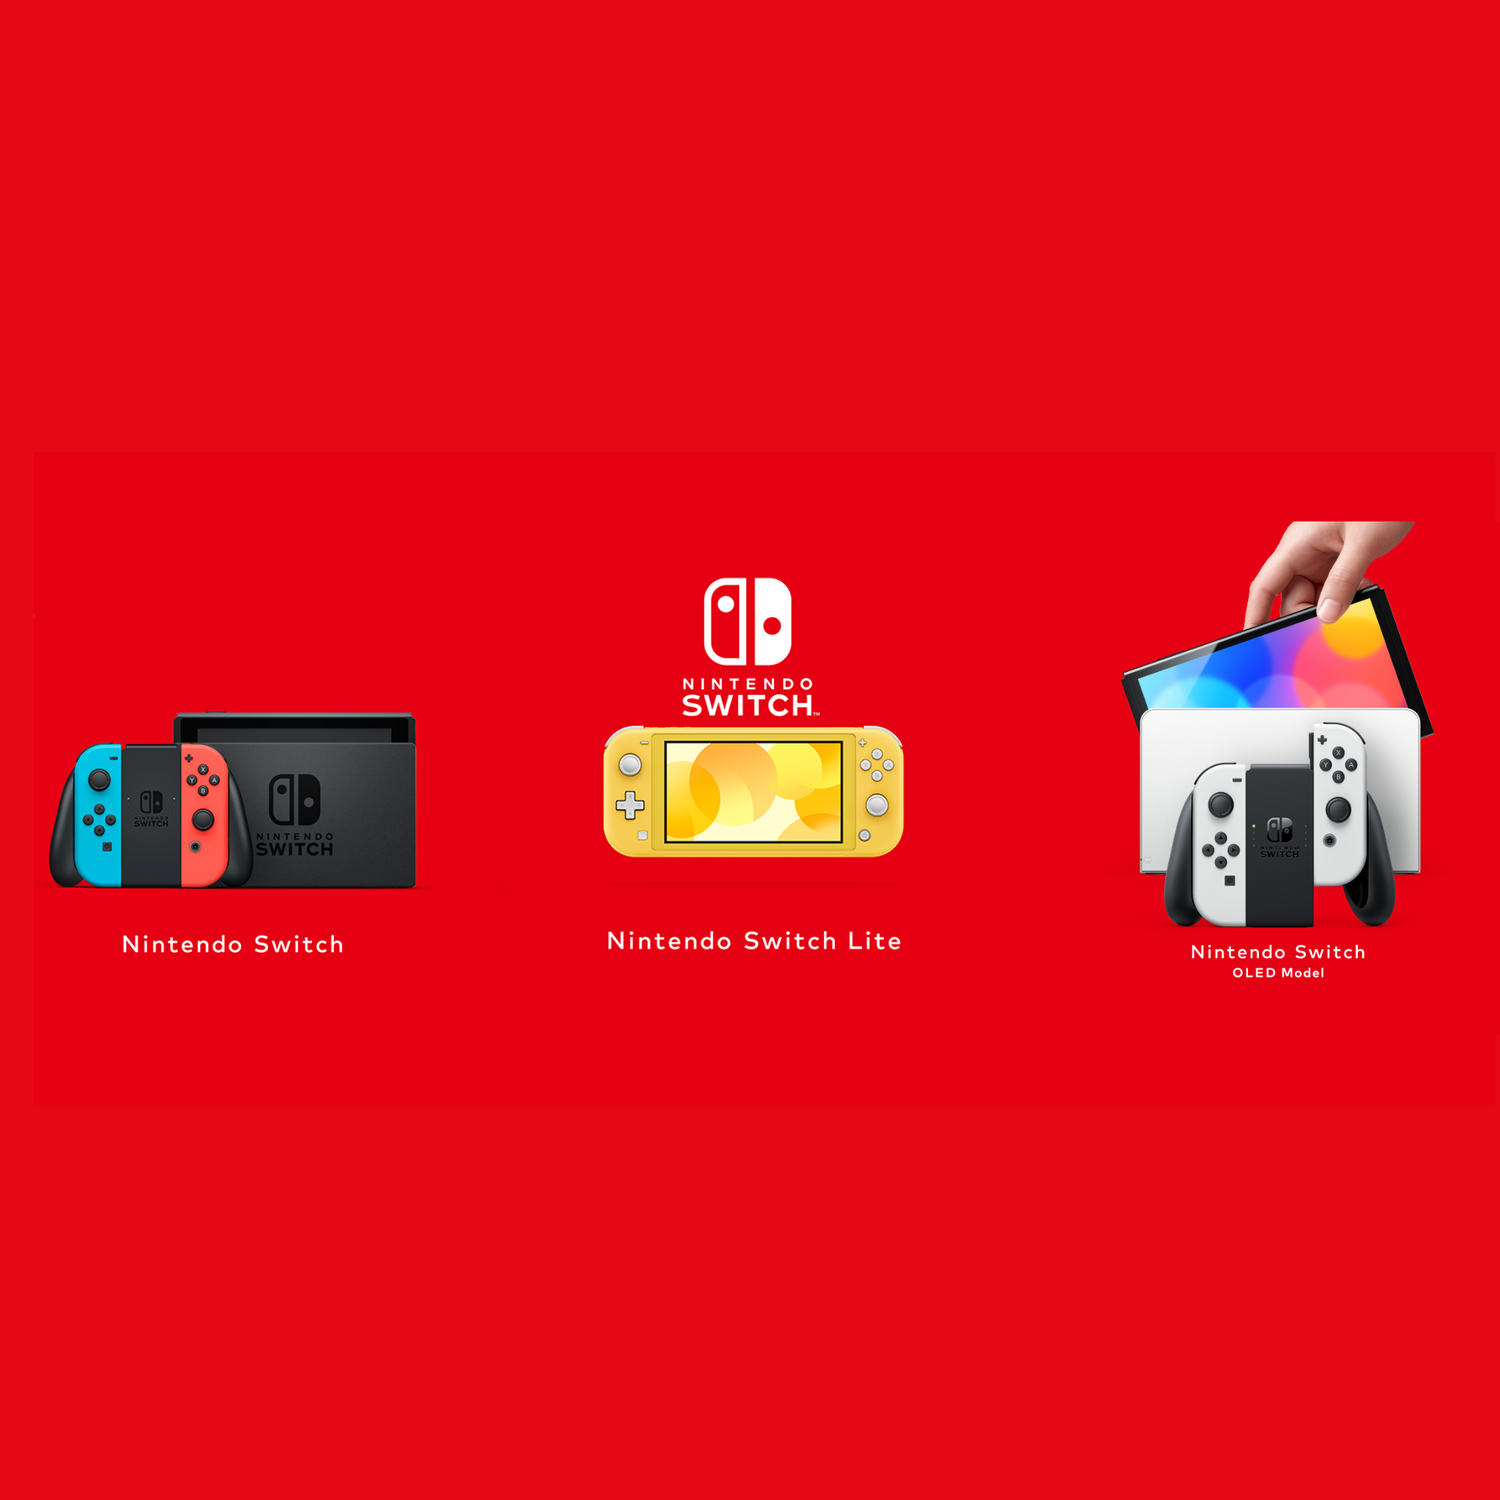 Nintendo Switch Game Pre-Orders